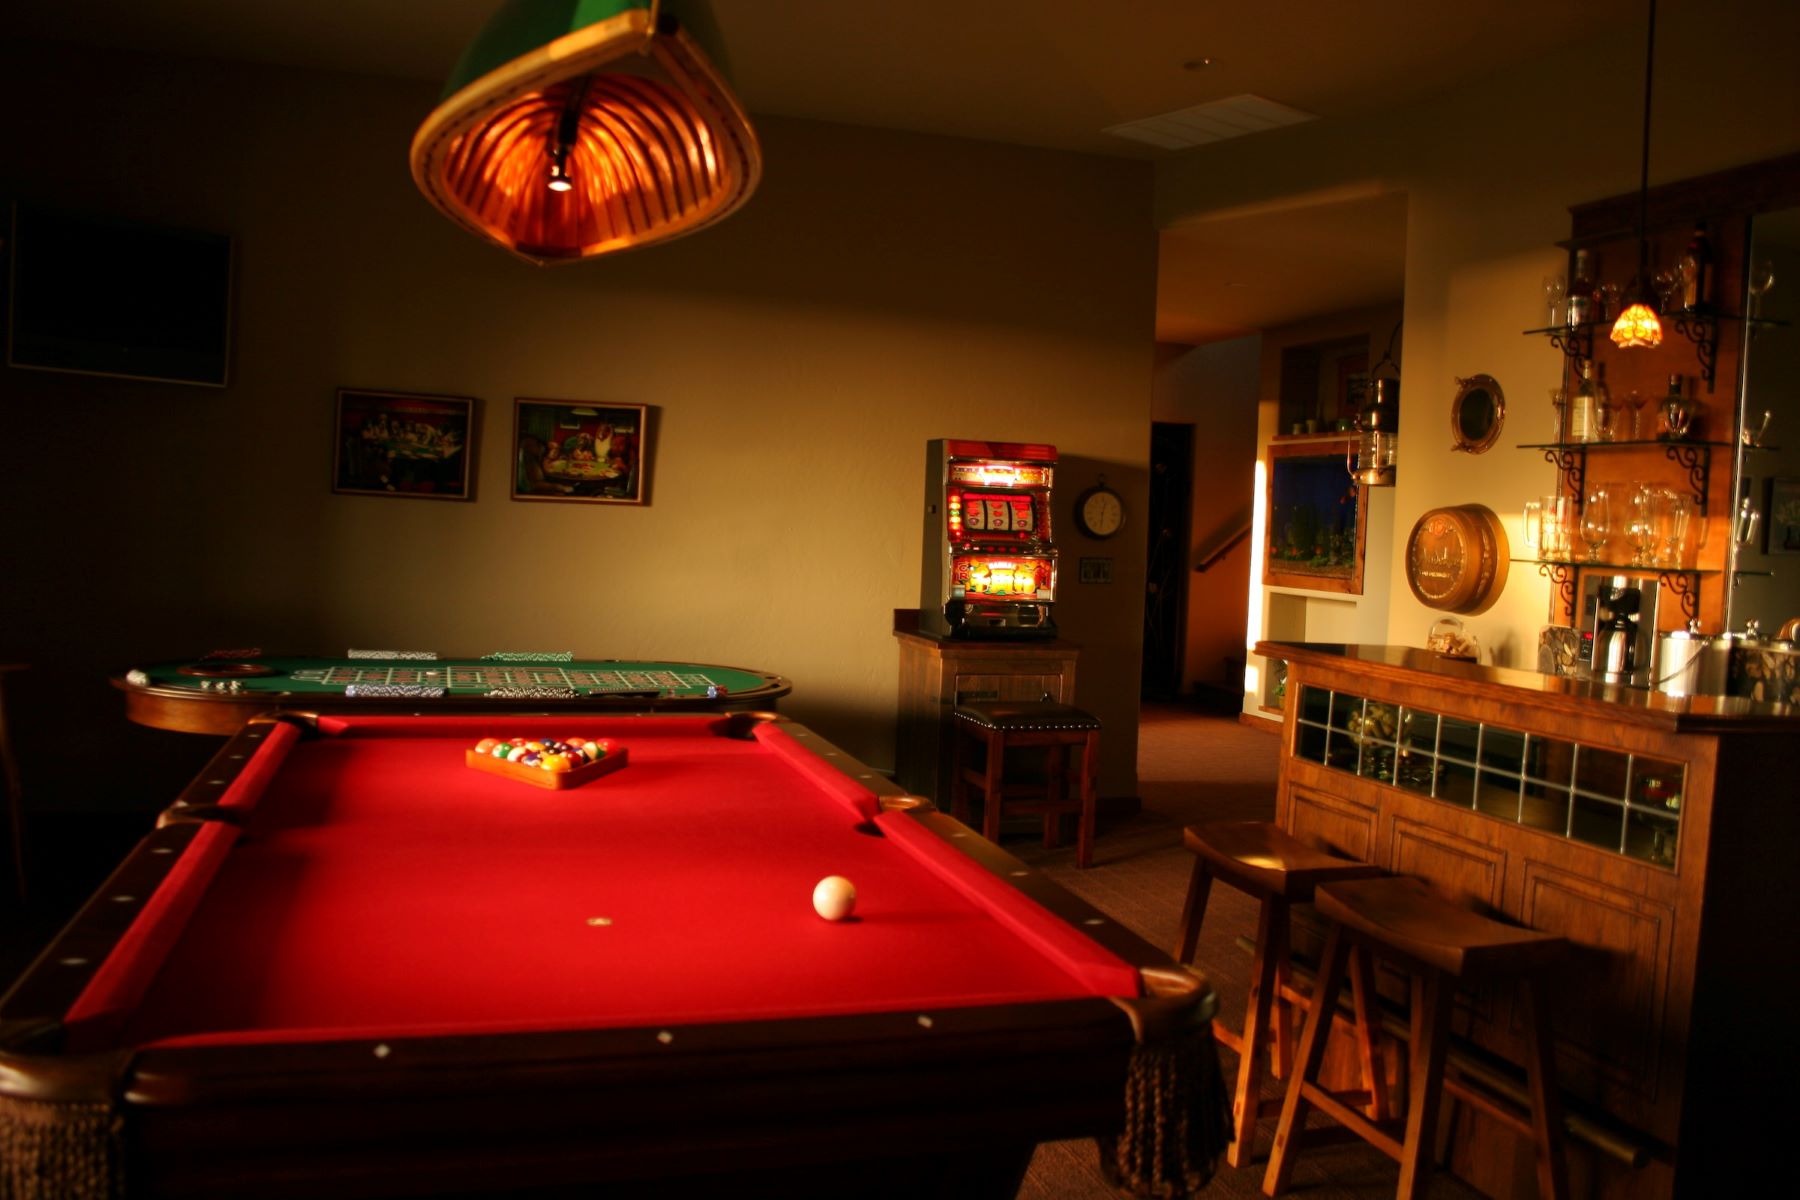 Pool Table dimensions in a closed space.